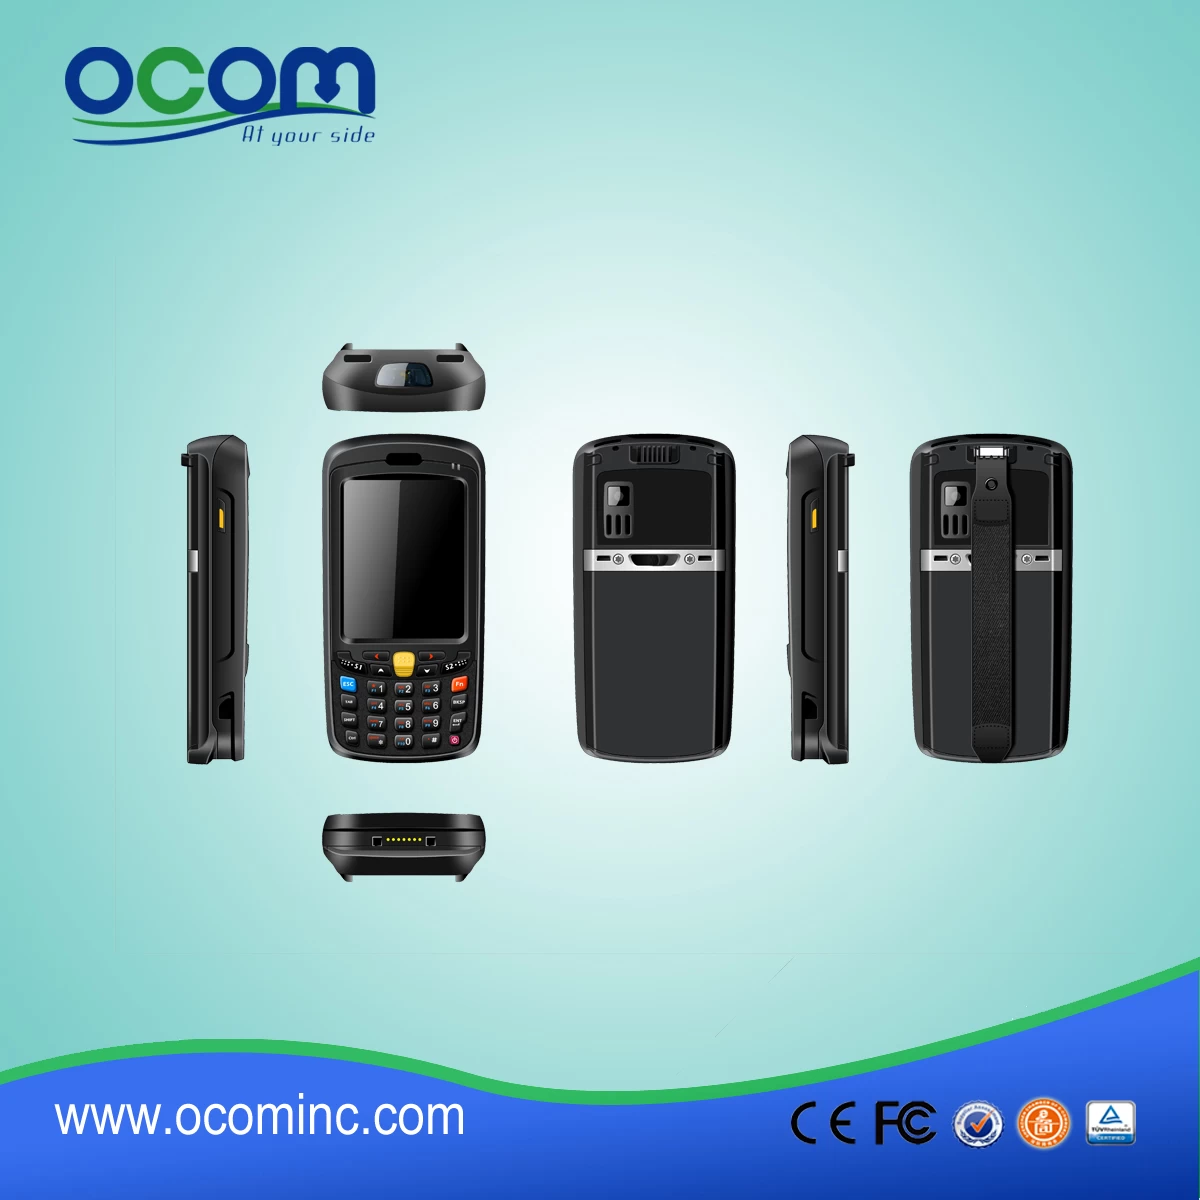 (OCBS-D008) Wi-Fi and Bluetooth Handheld Rugged Data Collector Industrial PDA